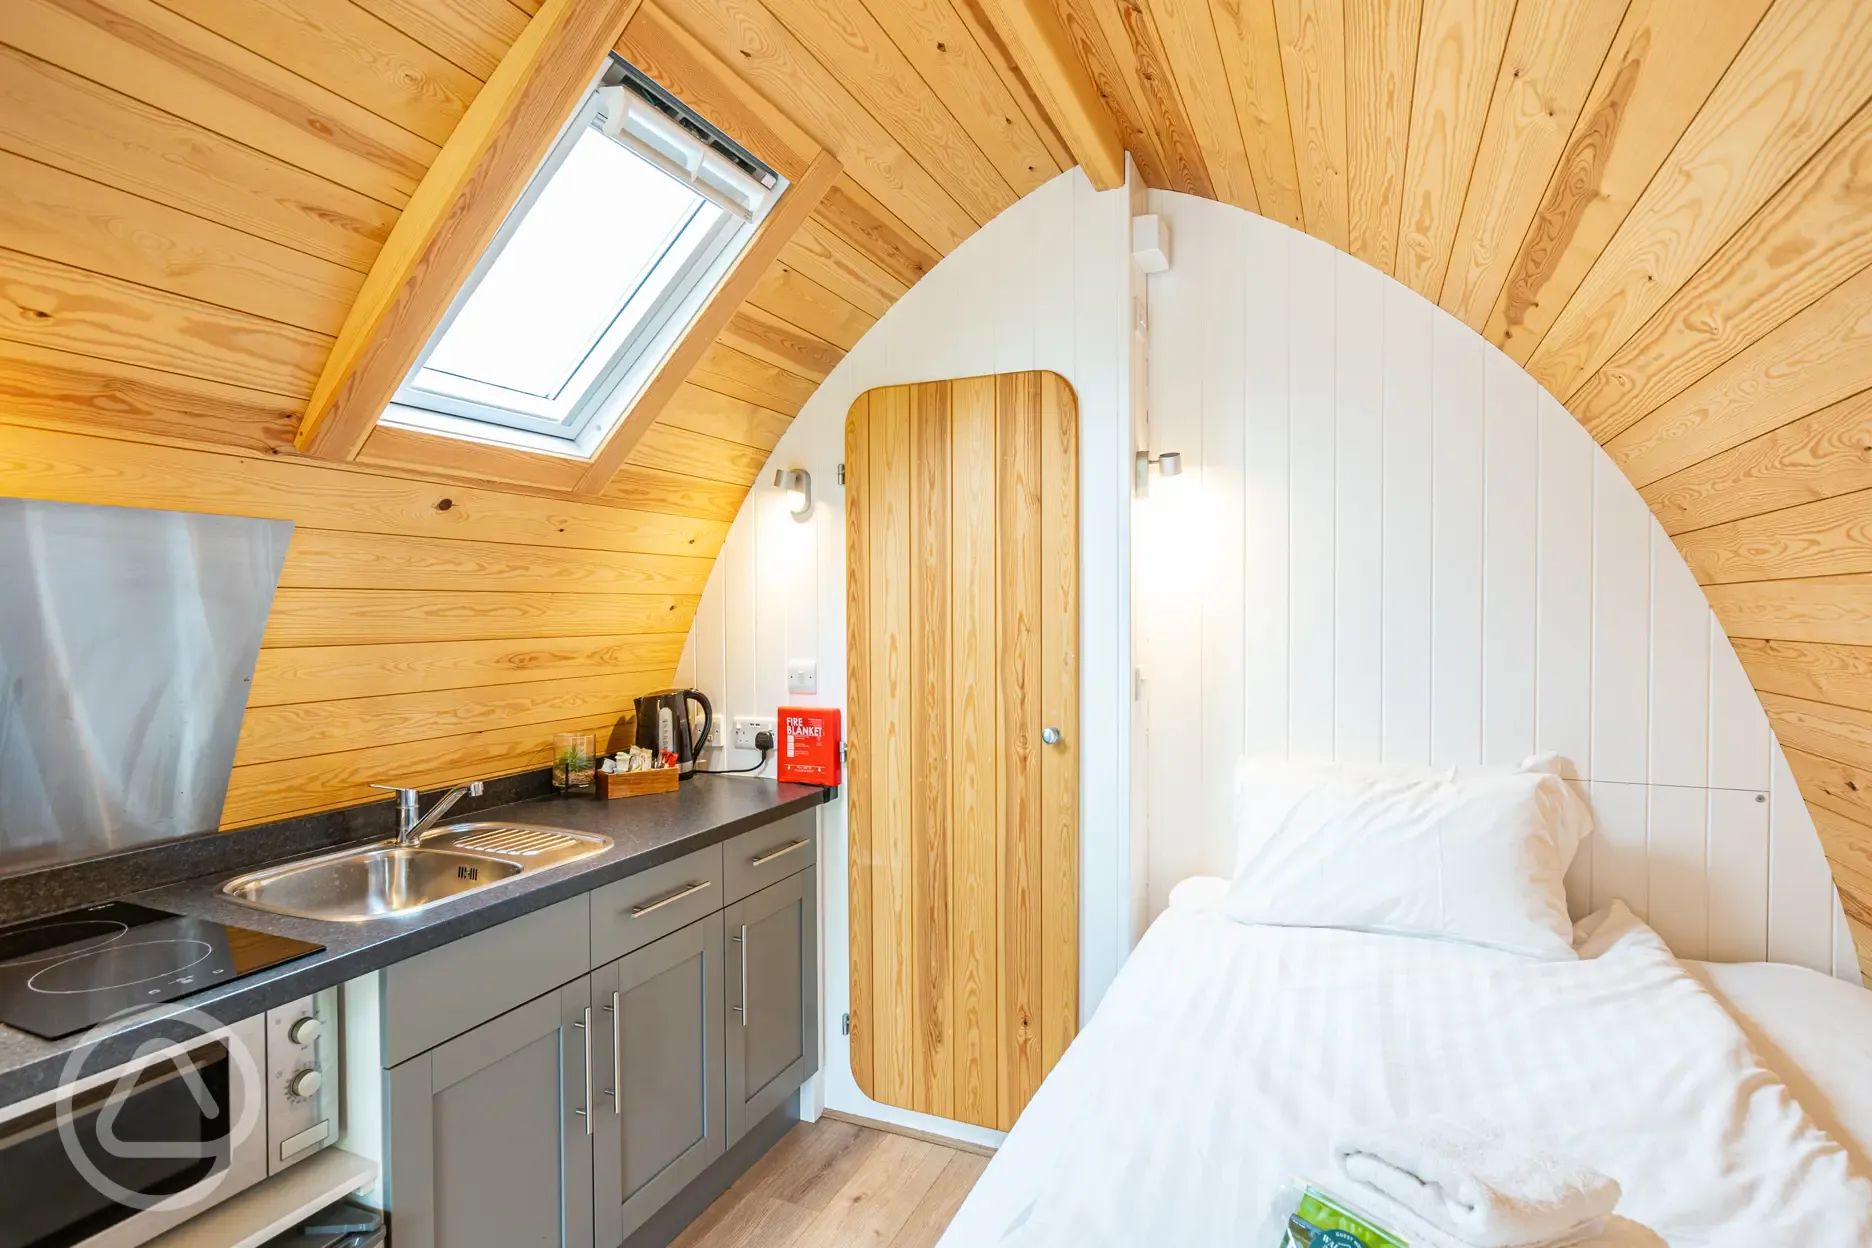 Adult only glamping pod double bed